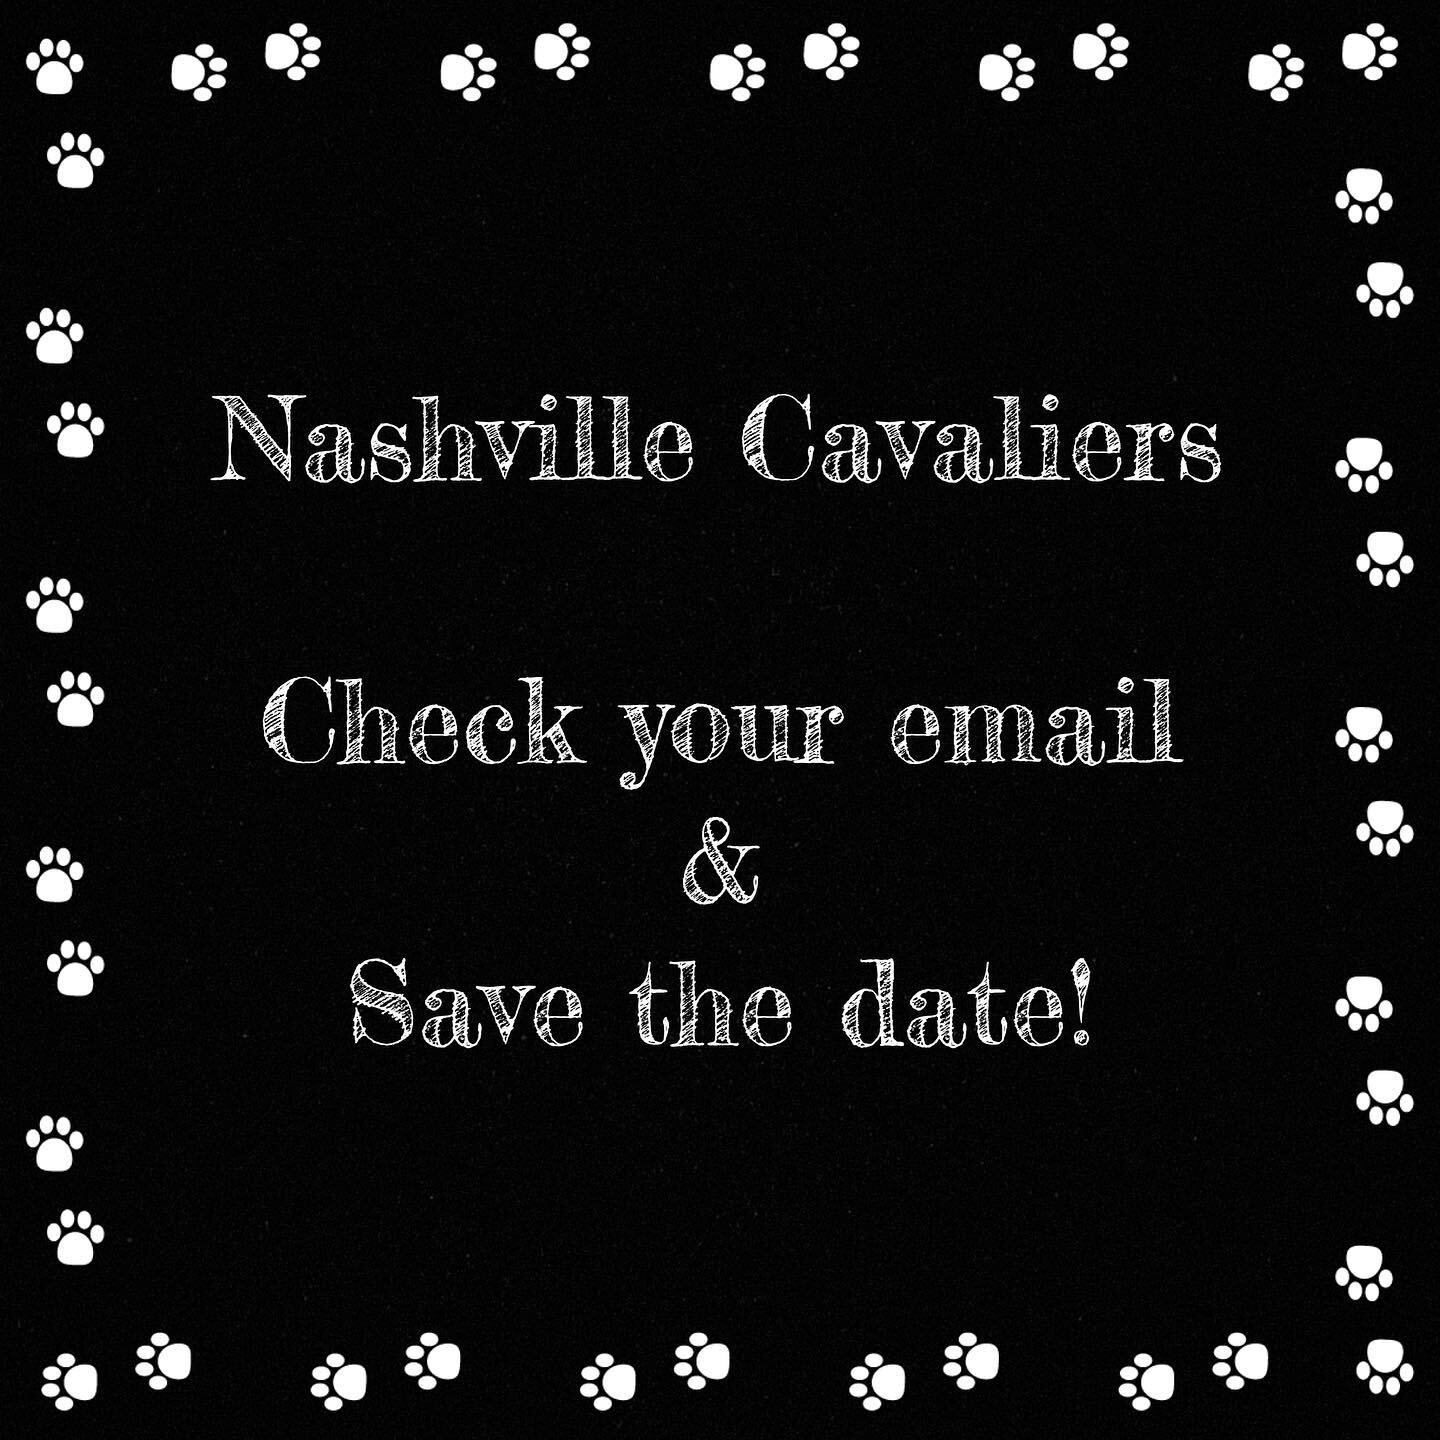 🎉🎉🎉 Save the date - 5/20/23! 🎉🎉🎉 It&rsquo;s been way too long since we&rsquo;ve all been together! Check your email for our announcement of our 1st event since 2020! We&rsquo;re looking forward to seeing our furrriends! Stay tuned for more even